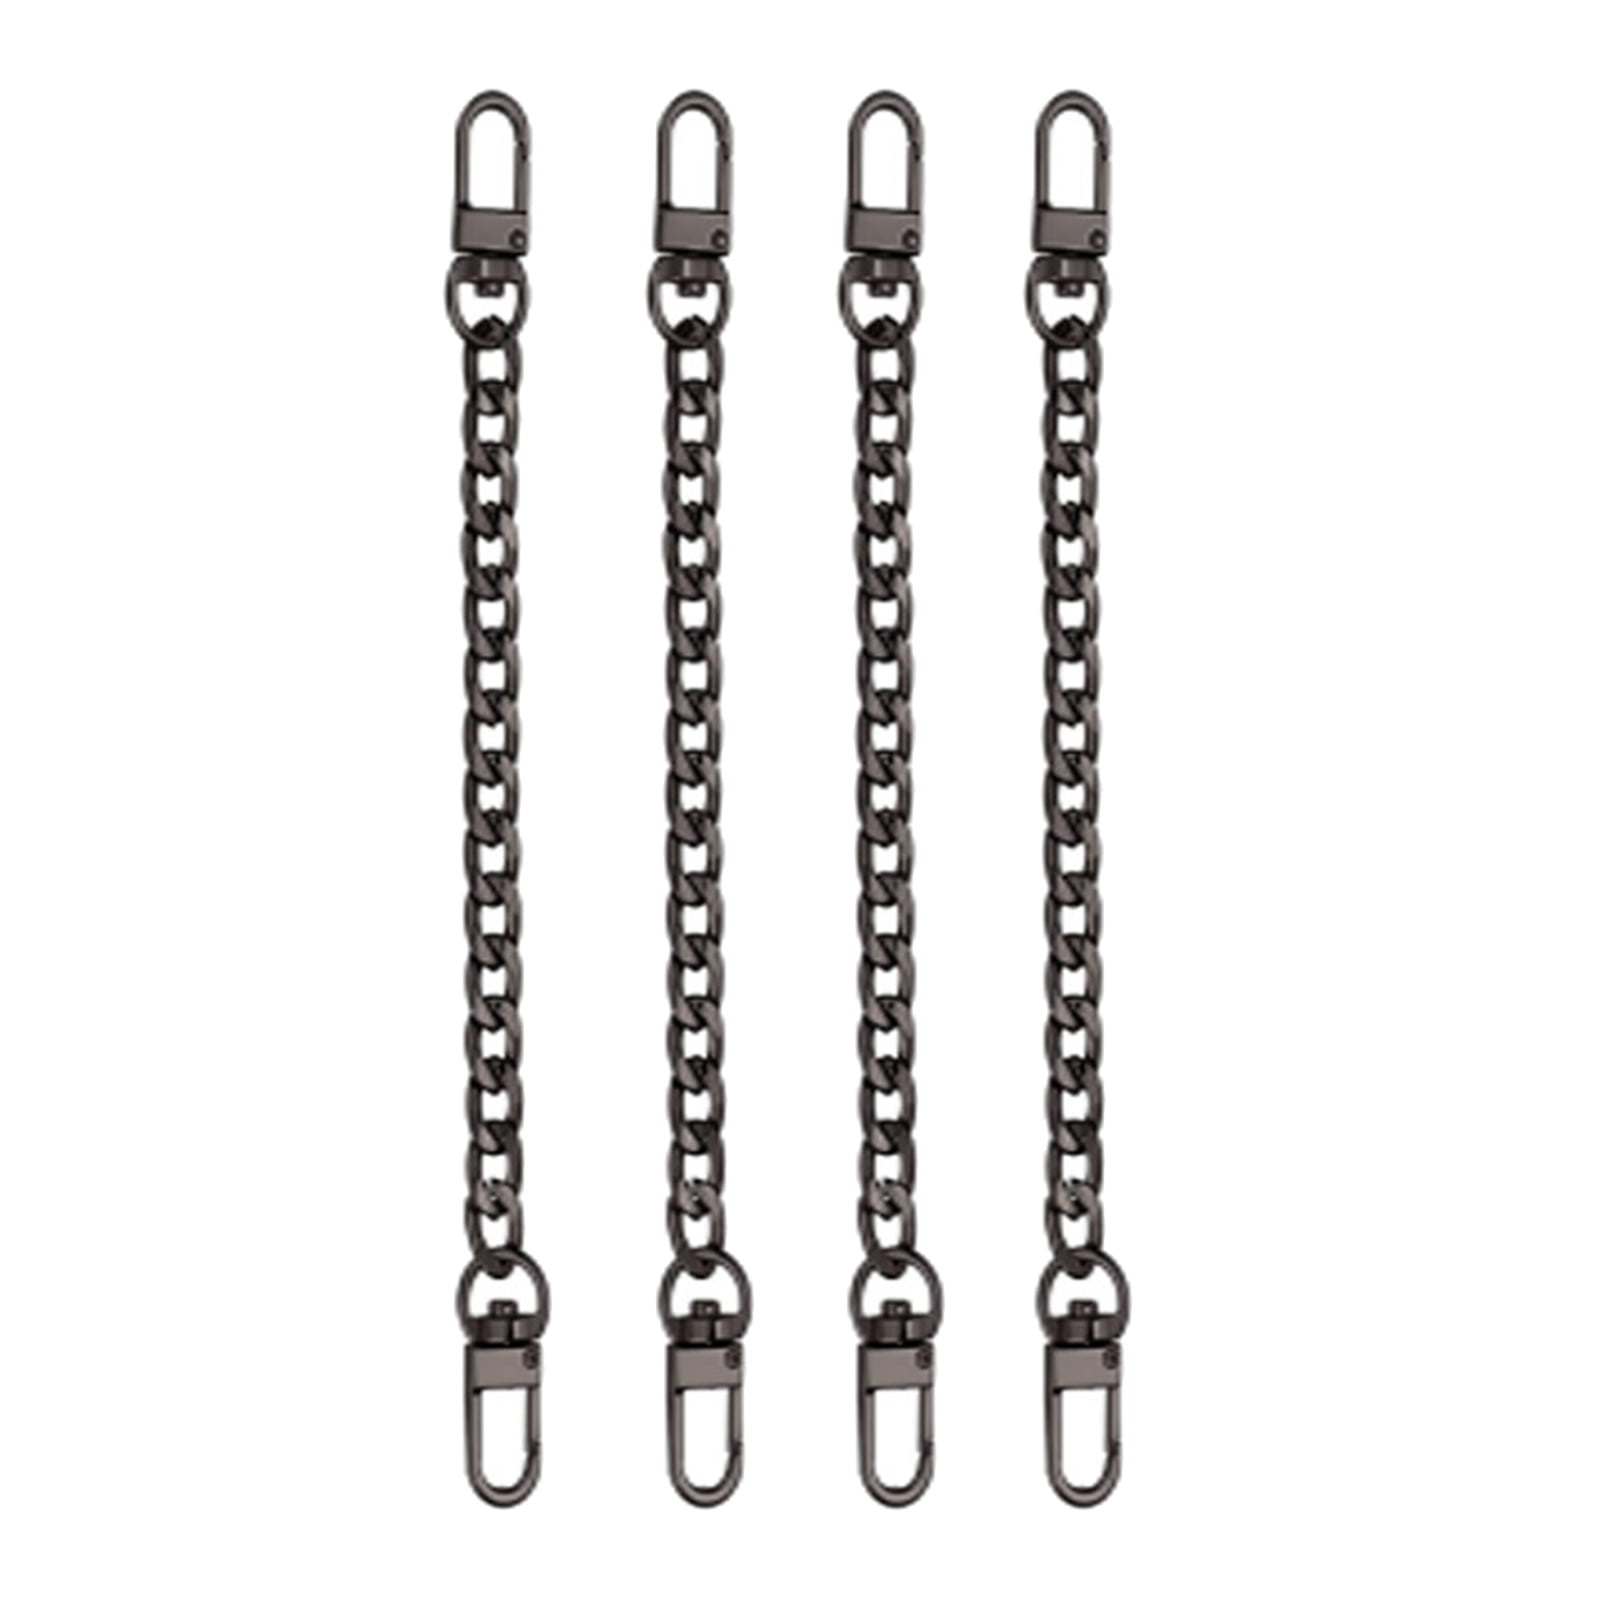 4 Pcs Purse Chain Strap Extender 7.9 Inch Purse Chain and 8 Pcs Studs  Rivets D Ring, Flat Purse Stra…See more 4 Pcs Purse Chain Strap Extender  7.9